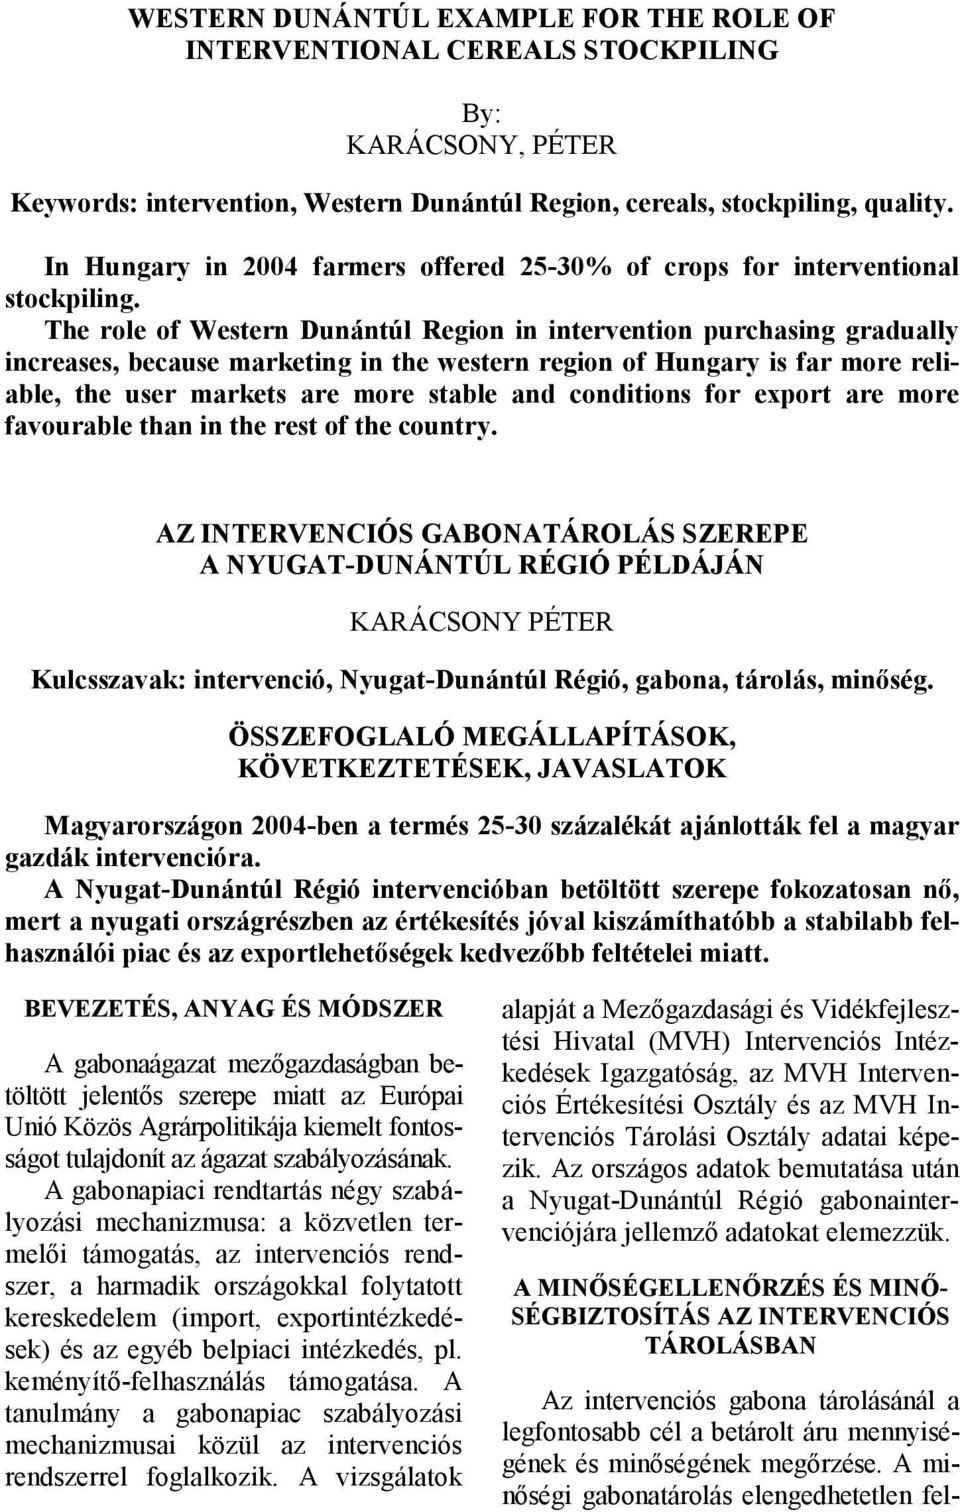 The role of Western Dunántúl Region in intervention purchasing gradually increases, because marketing in the western region of Hungary is far more reliable, the user markets are more stable and